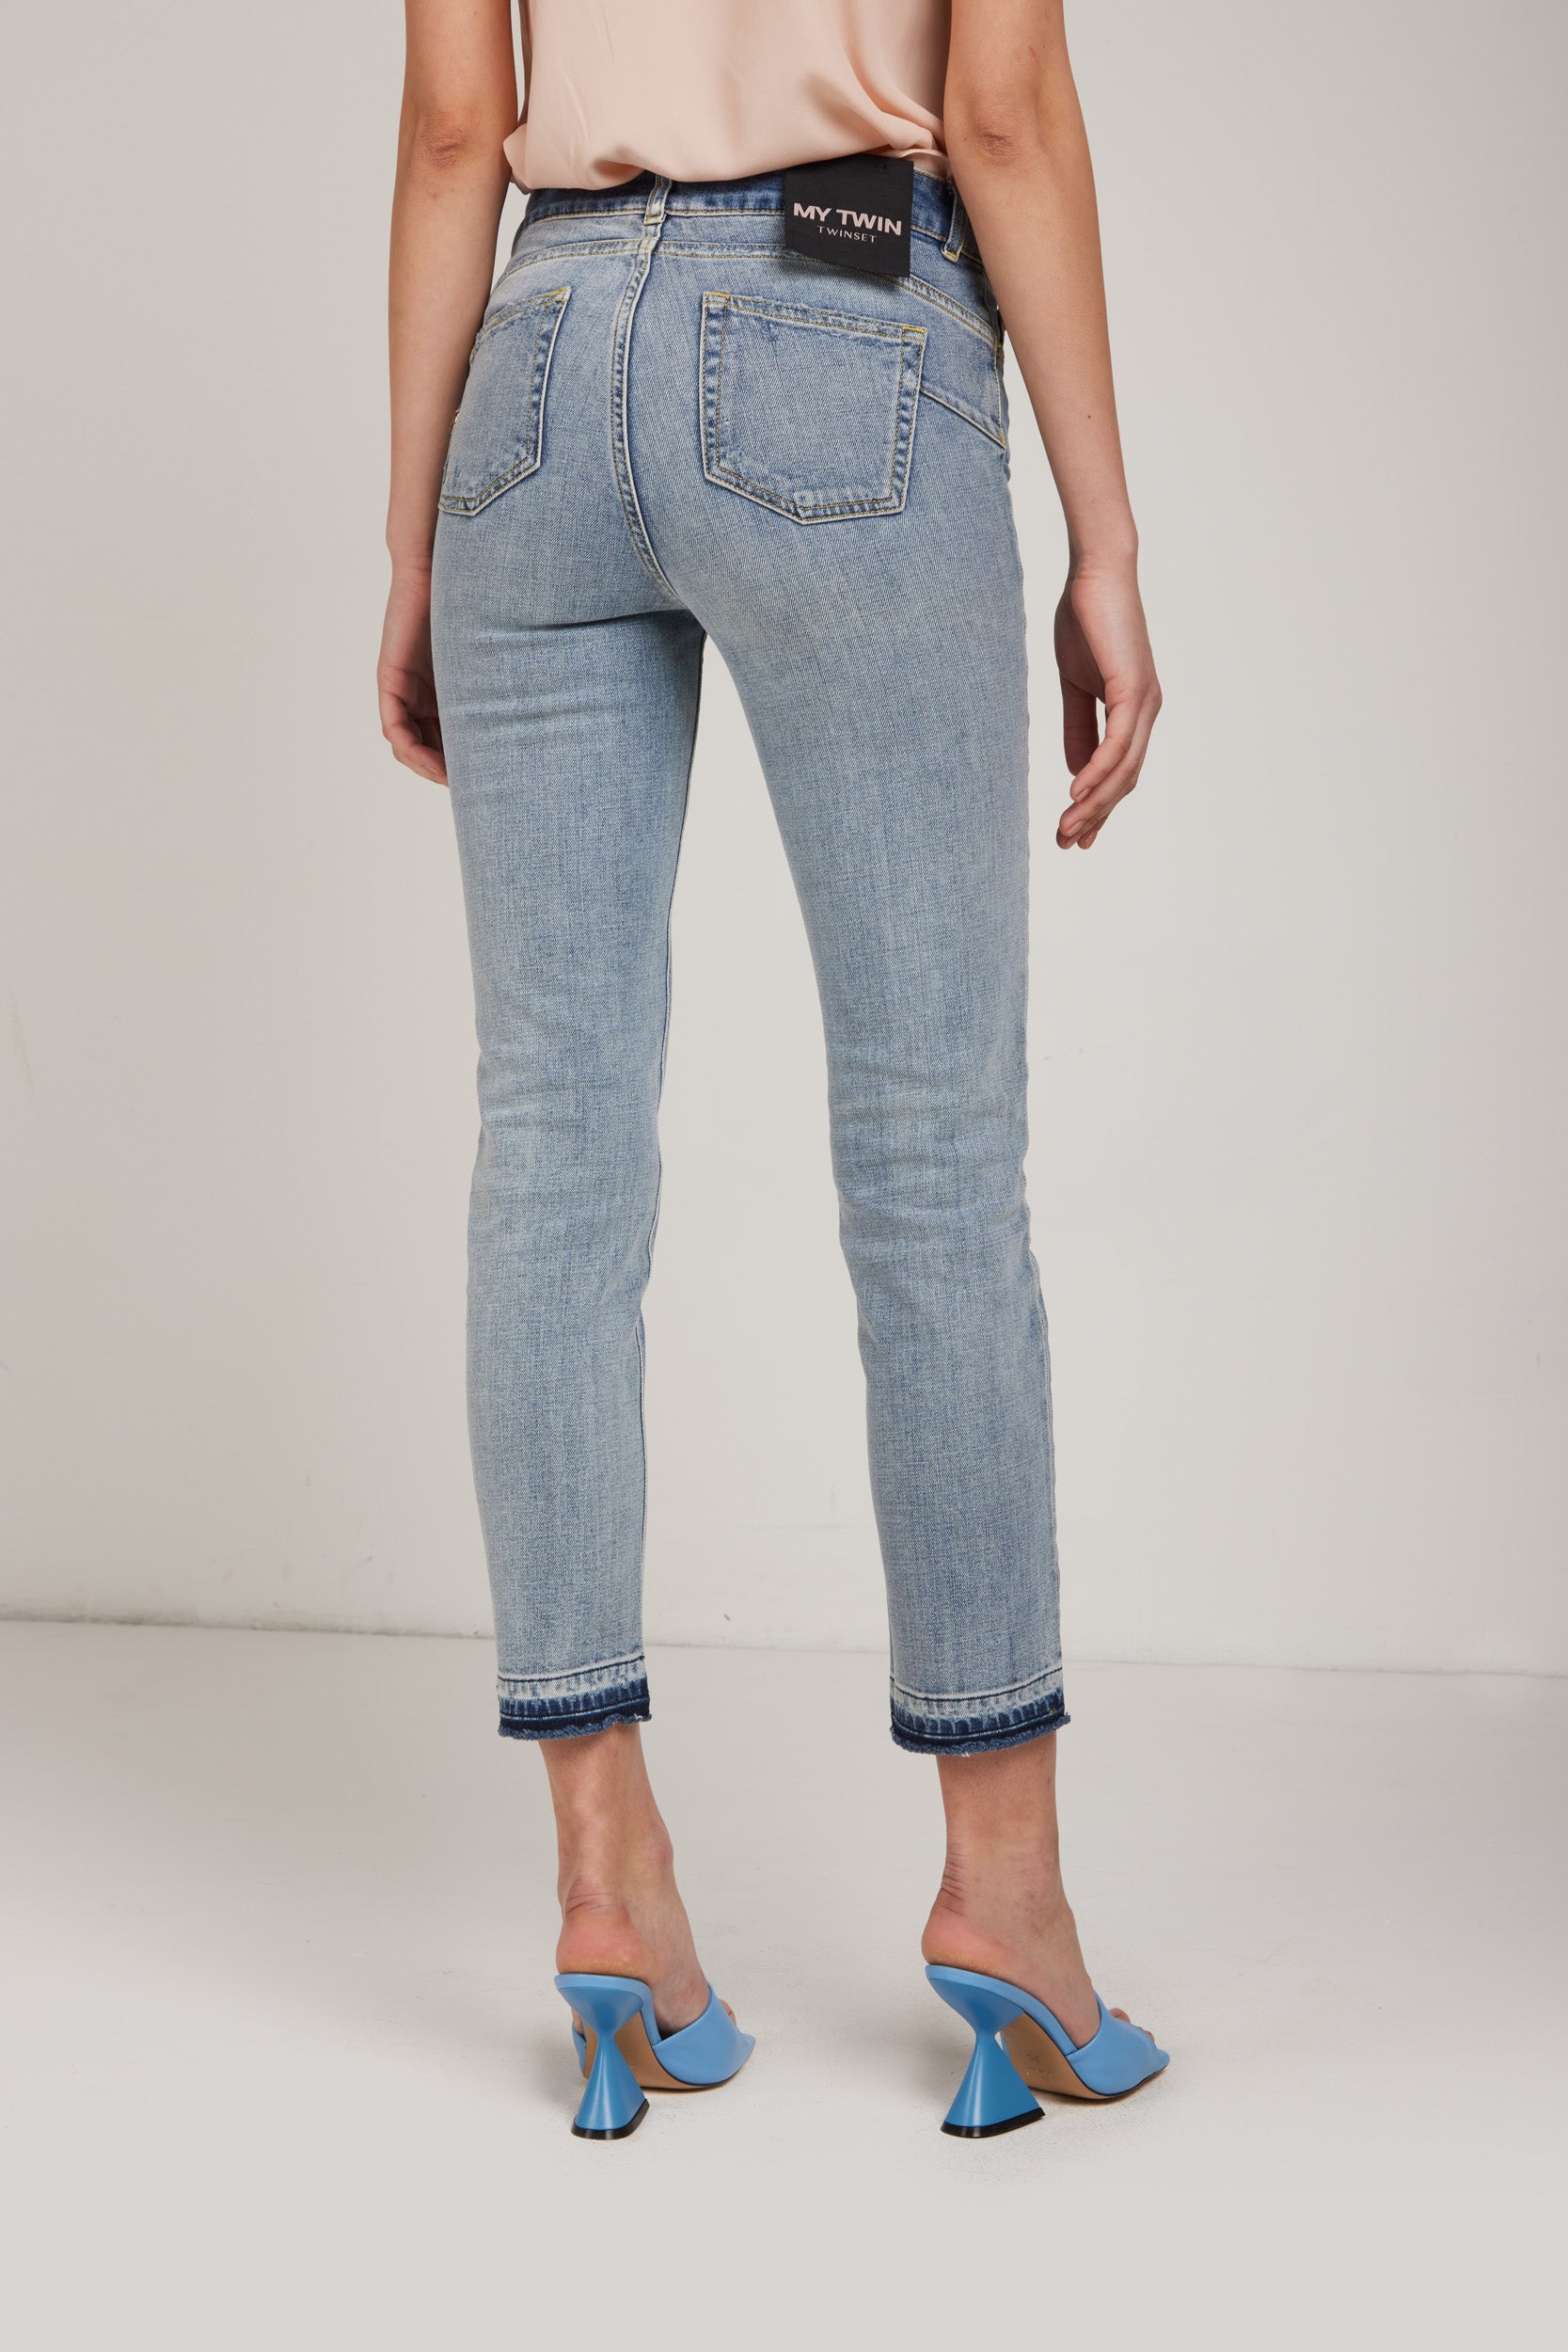 TWINSET Skinny Jeans mit doppelter Waschung